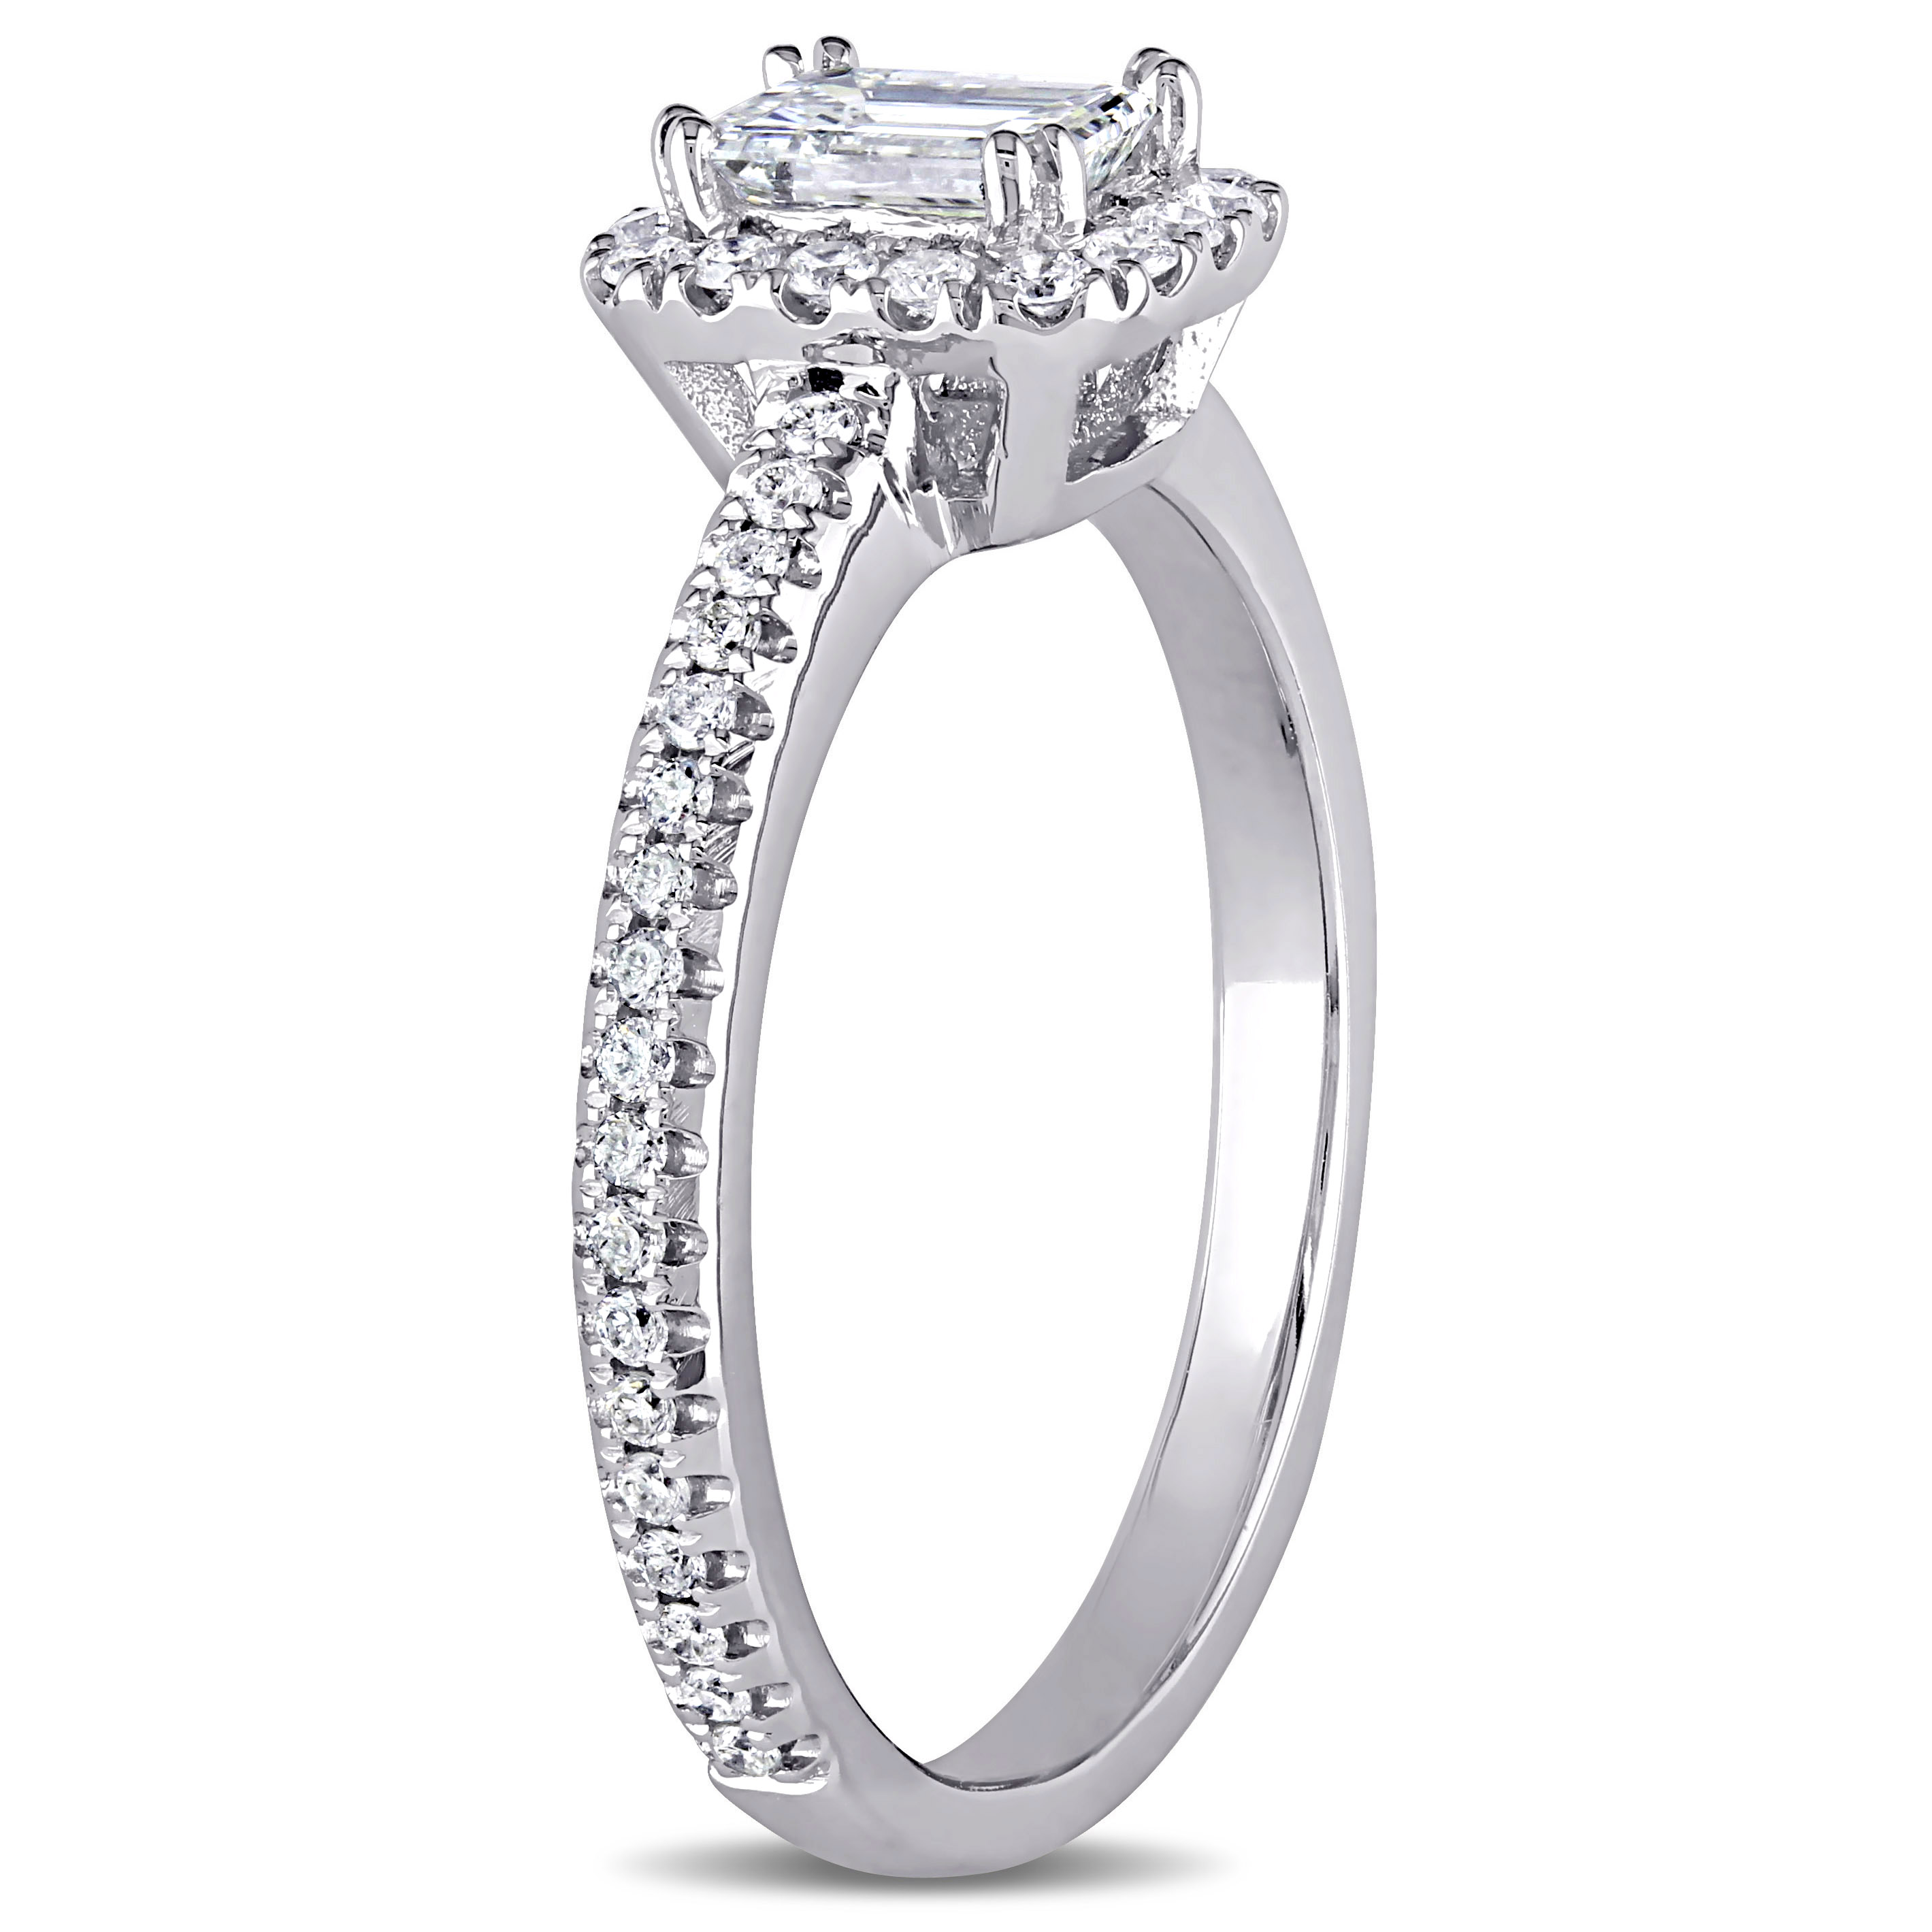 7/8 CT TW Emerald Cut and Round Diamond Engagement Ring in 14k White Gold